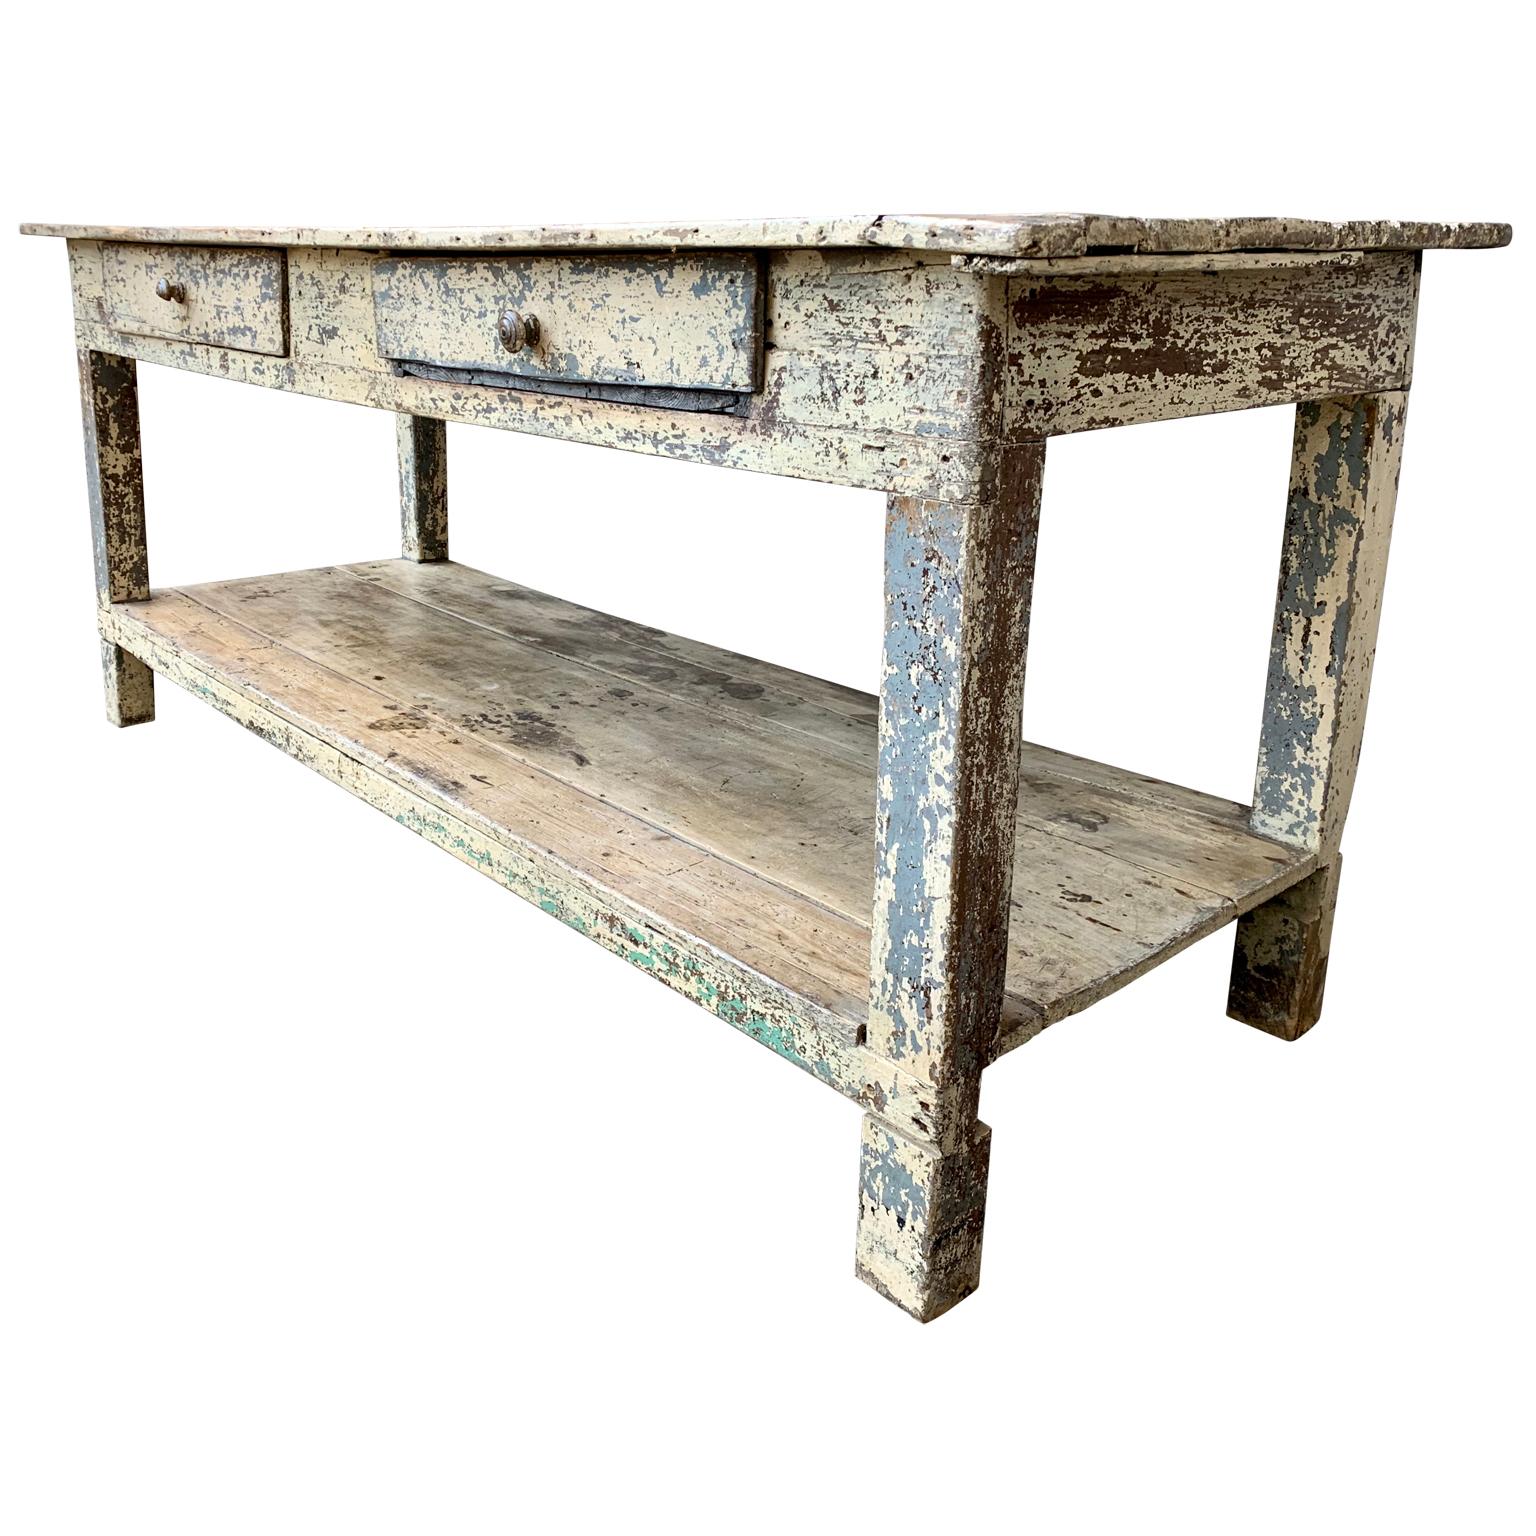 A 19th century painted table from a fabric and upholstery store with 2 large drawers. With all its original rustic patina and different layers of paint that this heavily used farm table has gone through the years. 

 